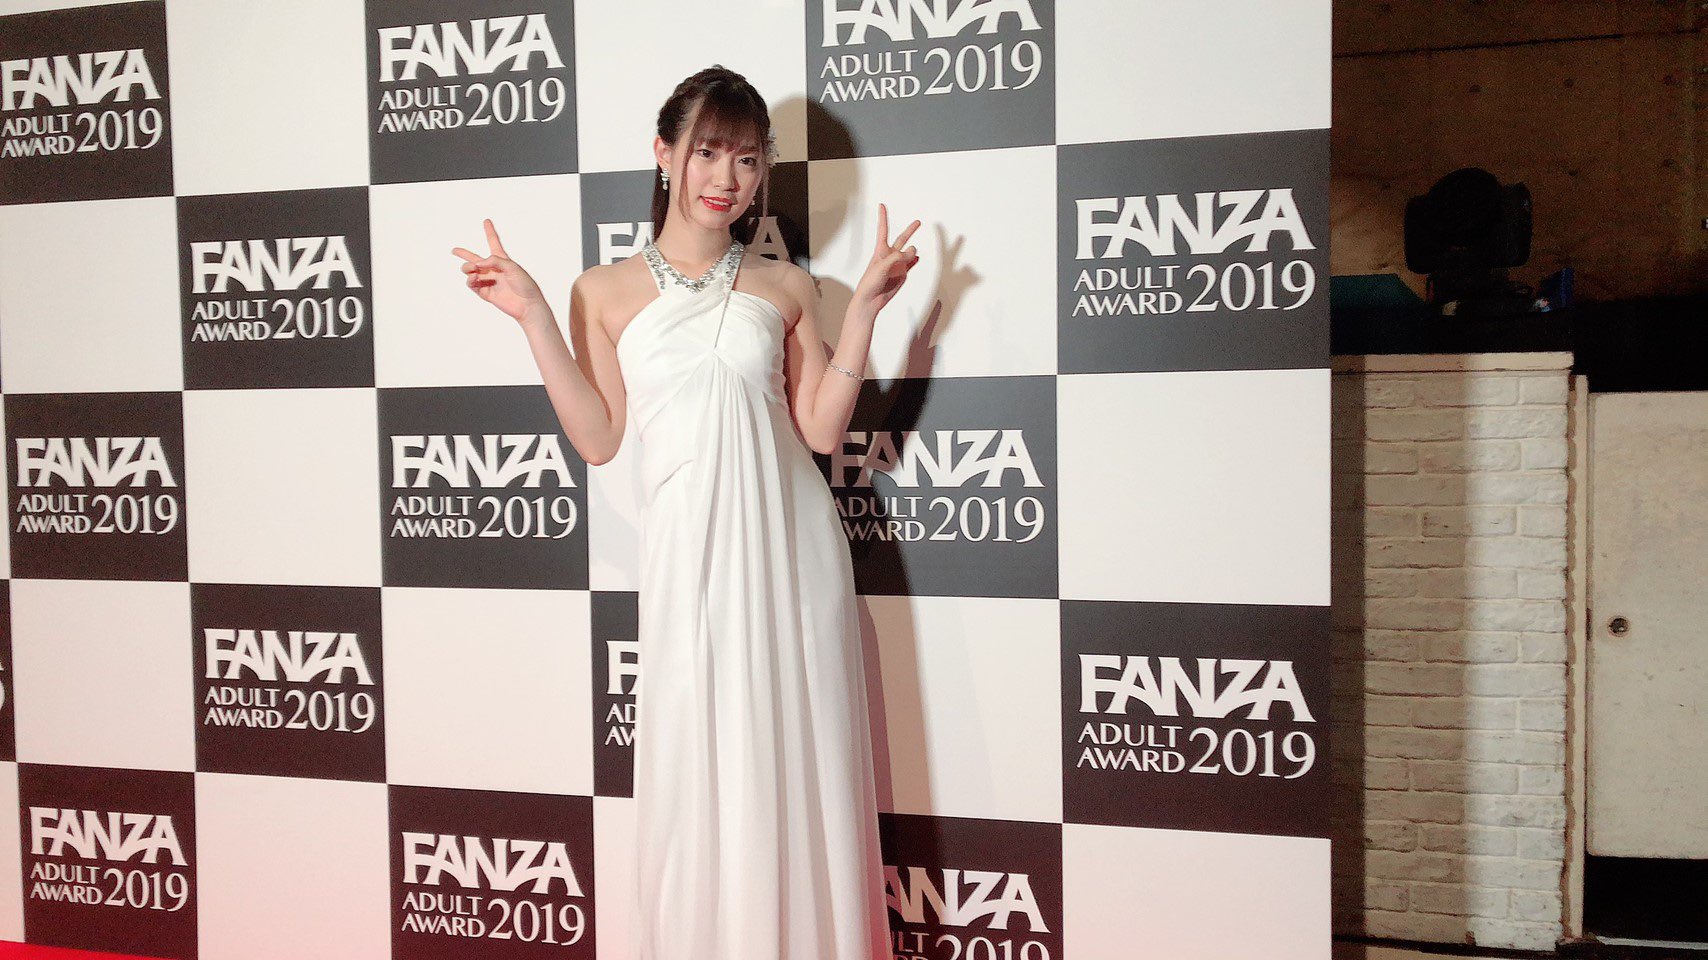 2019 Fanza adult awards results